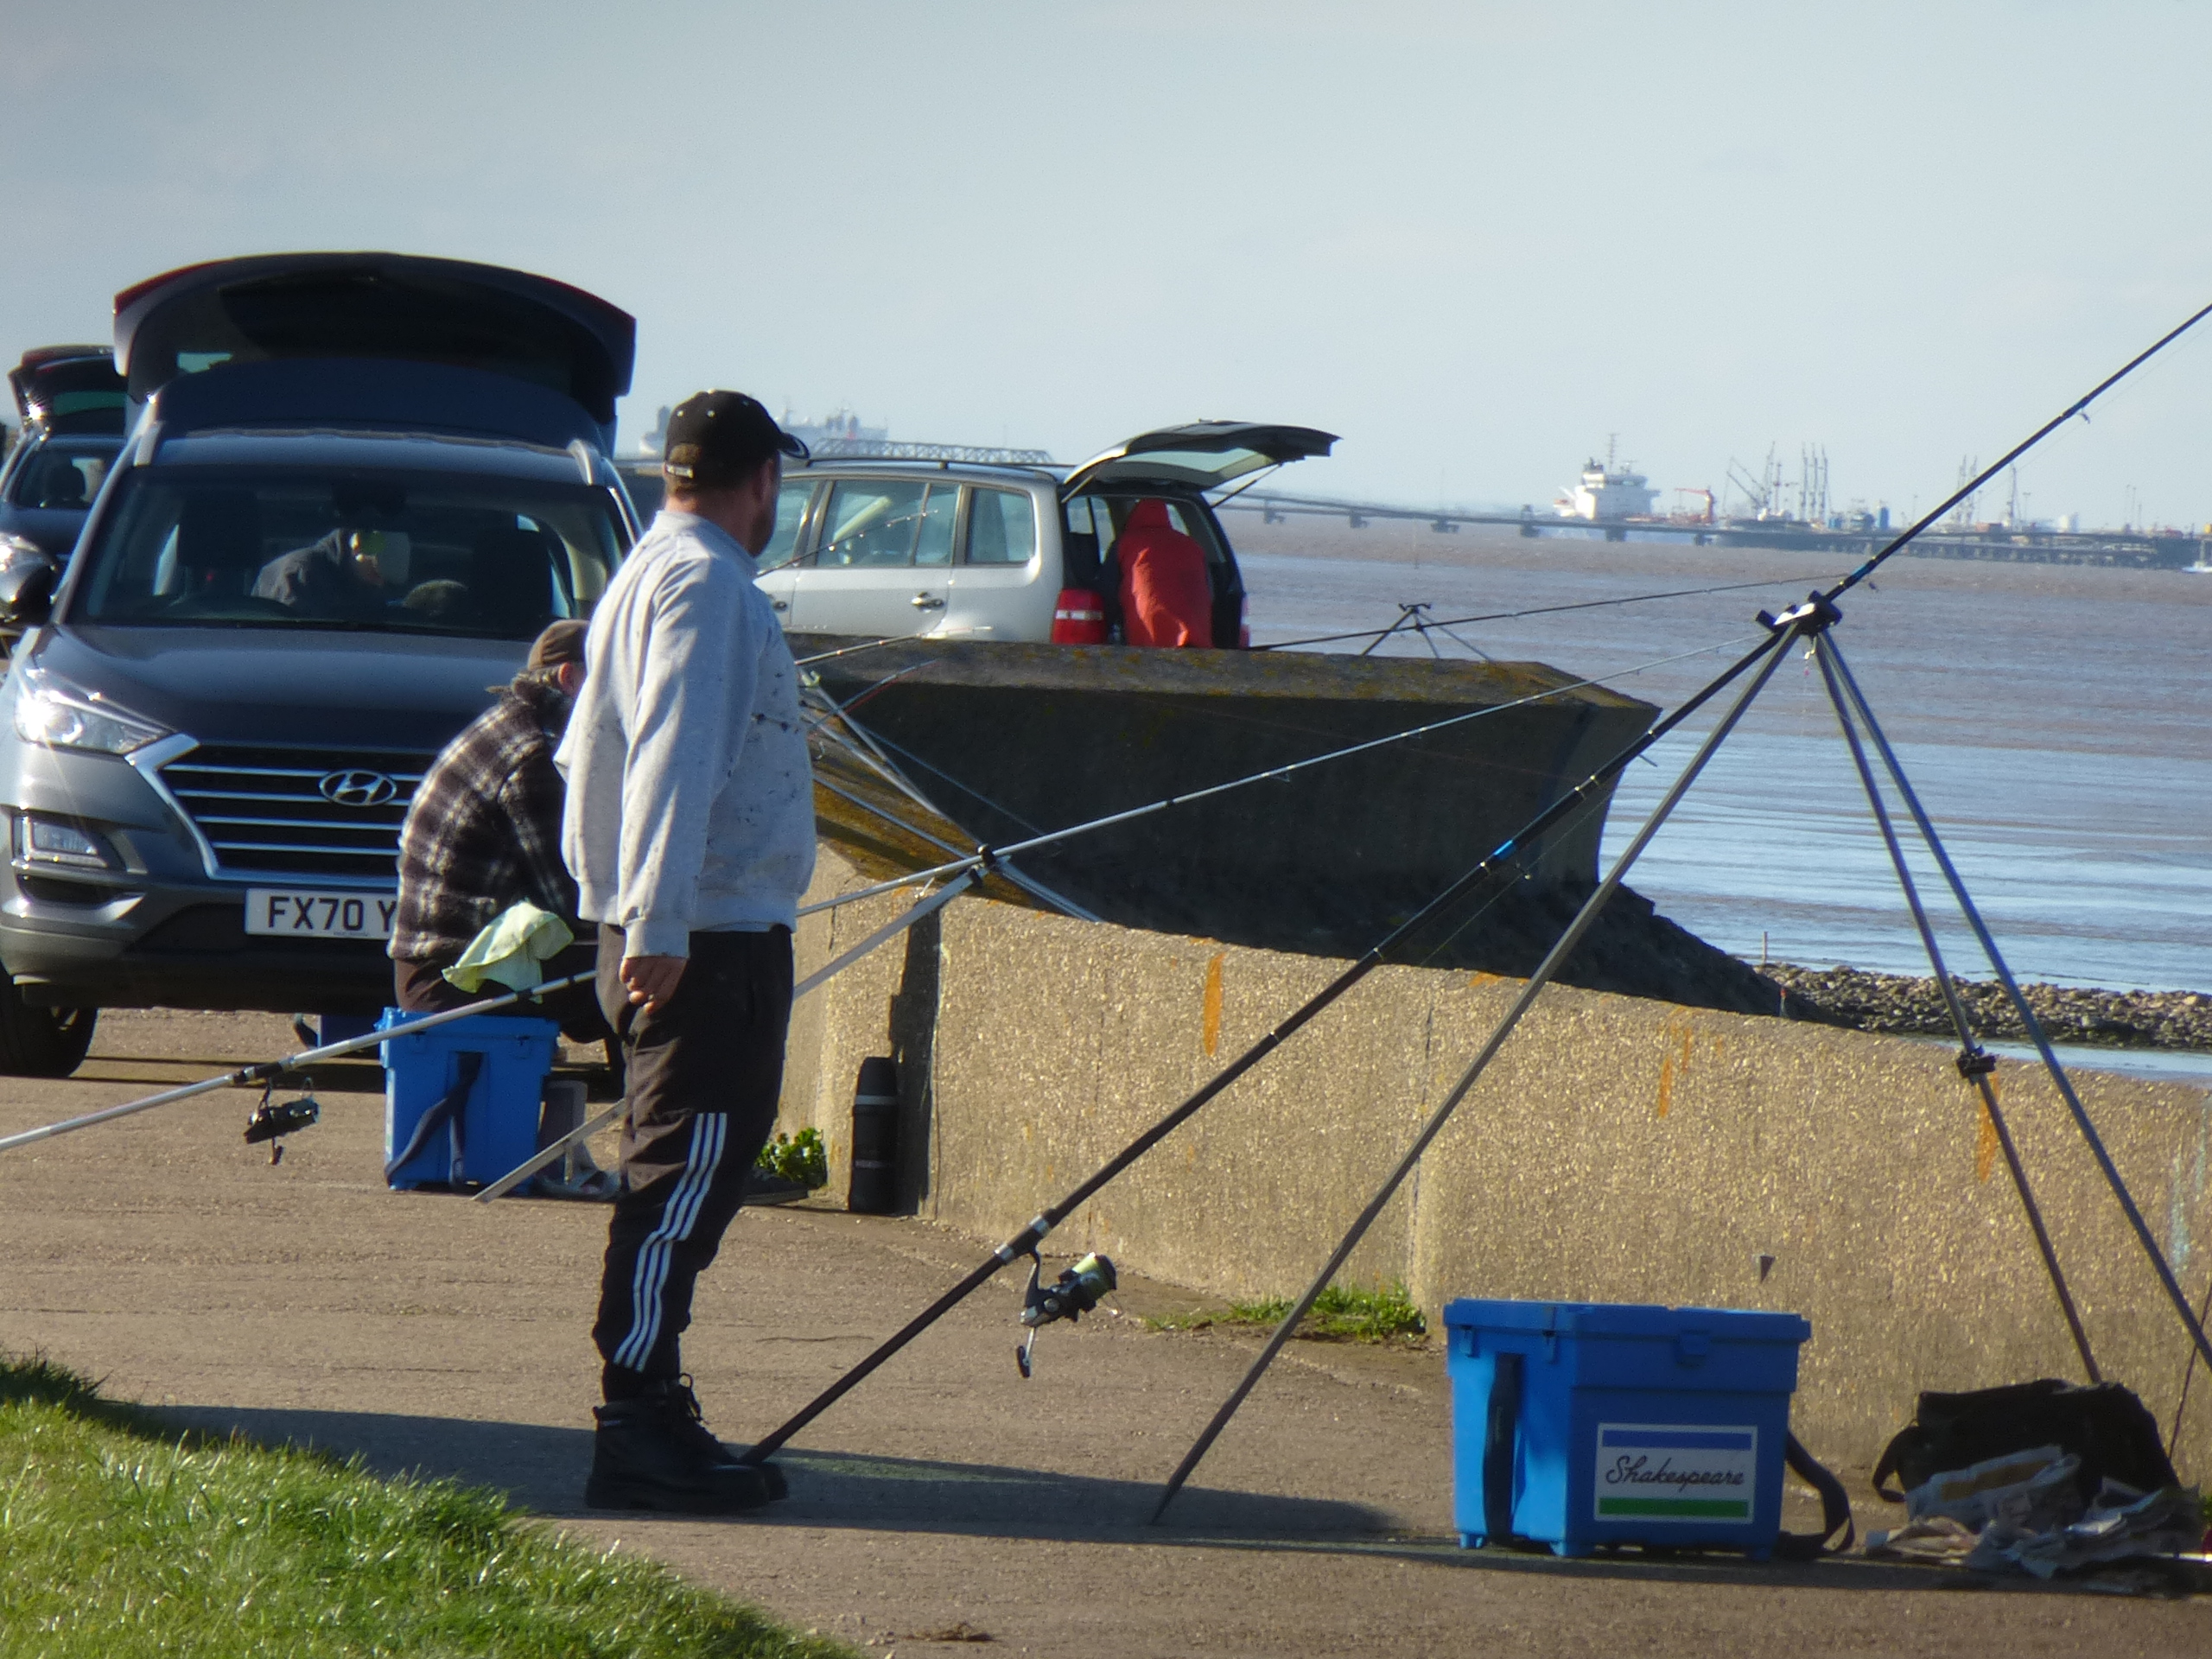 Three anglers fishing at the Shallows, Grimsby